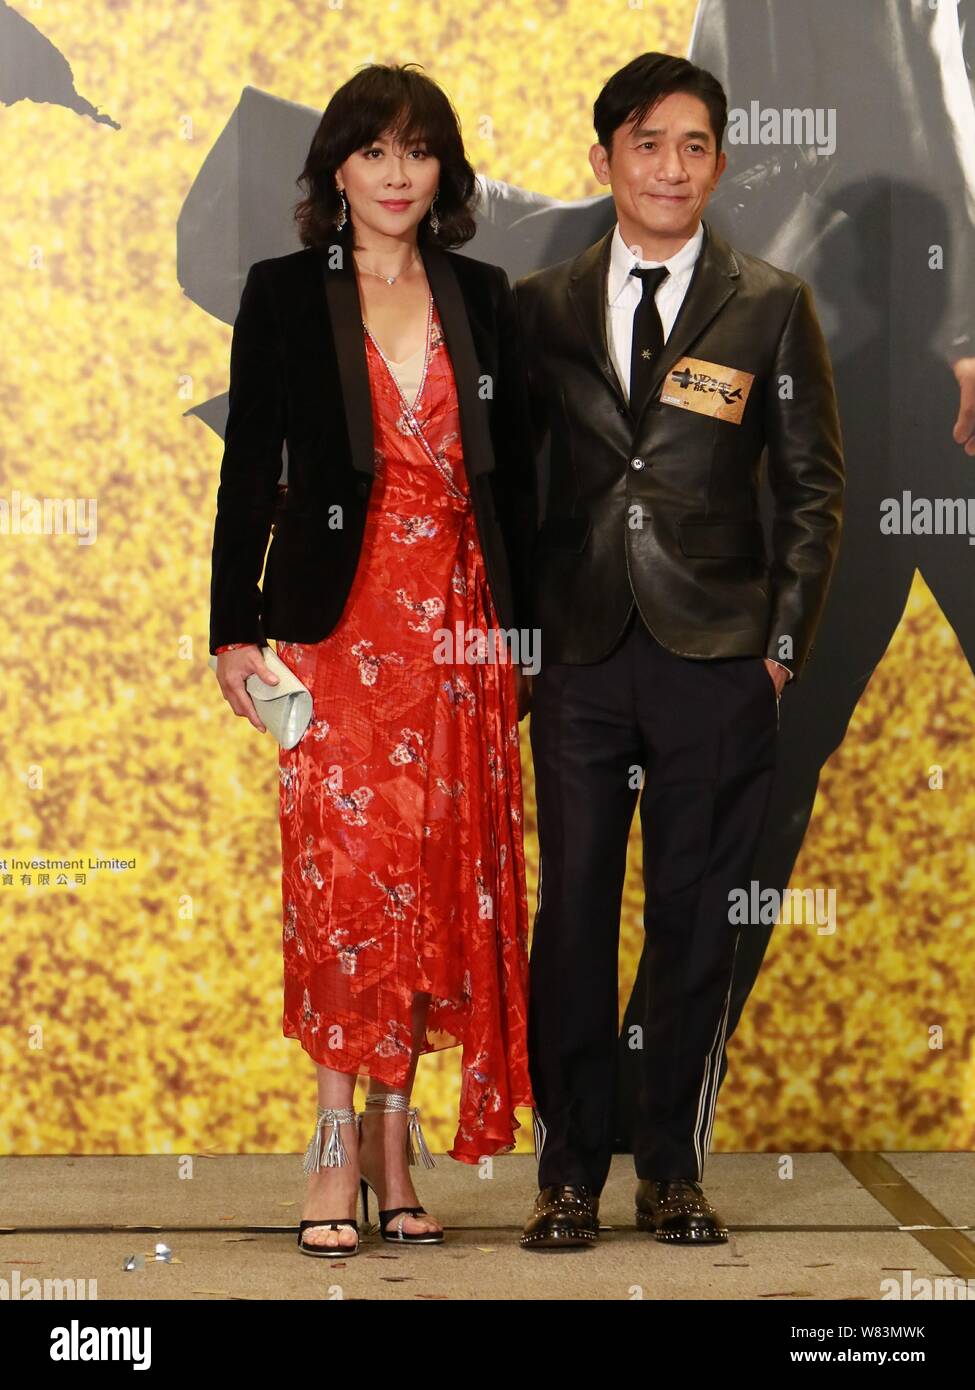 Hong Kong actor Tony Leung Chiu-wai, right, and his actress wife Carina Lau attend a charity premiere event for his new movie 'See You Tomorrow' in Ho Stock Photo